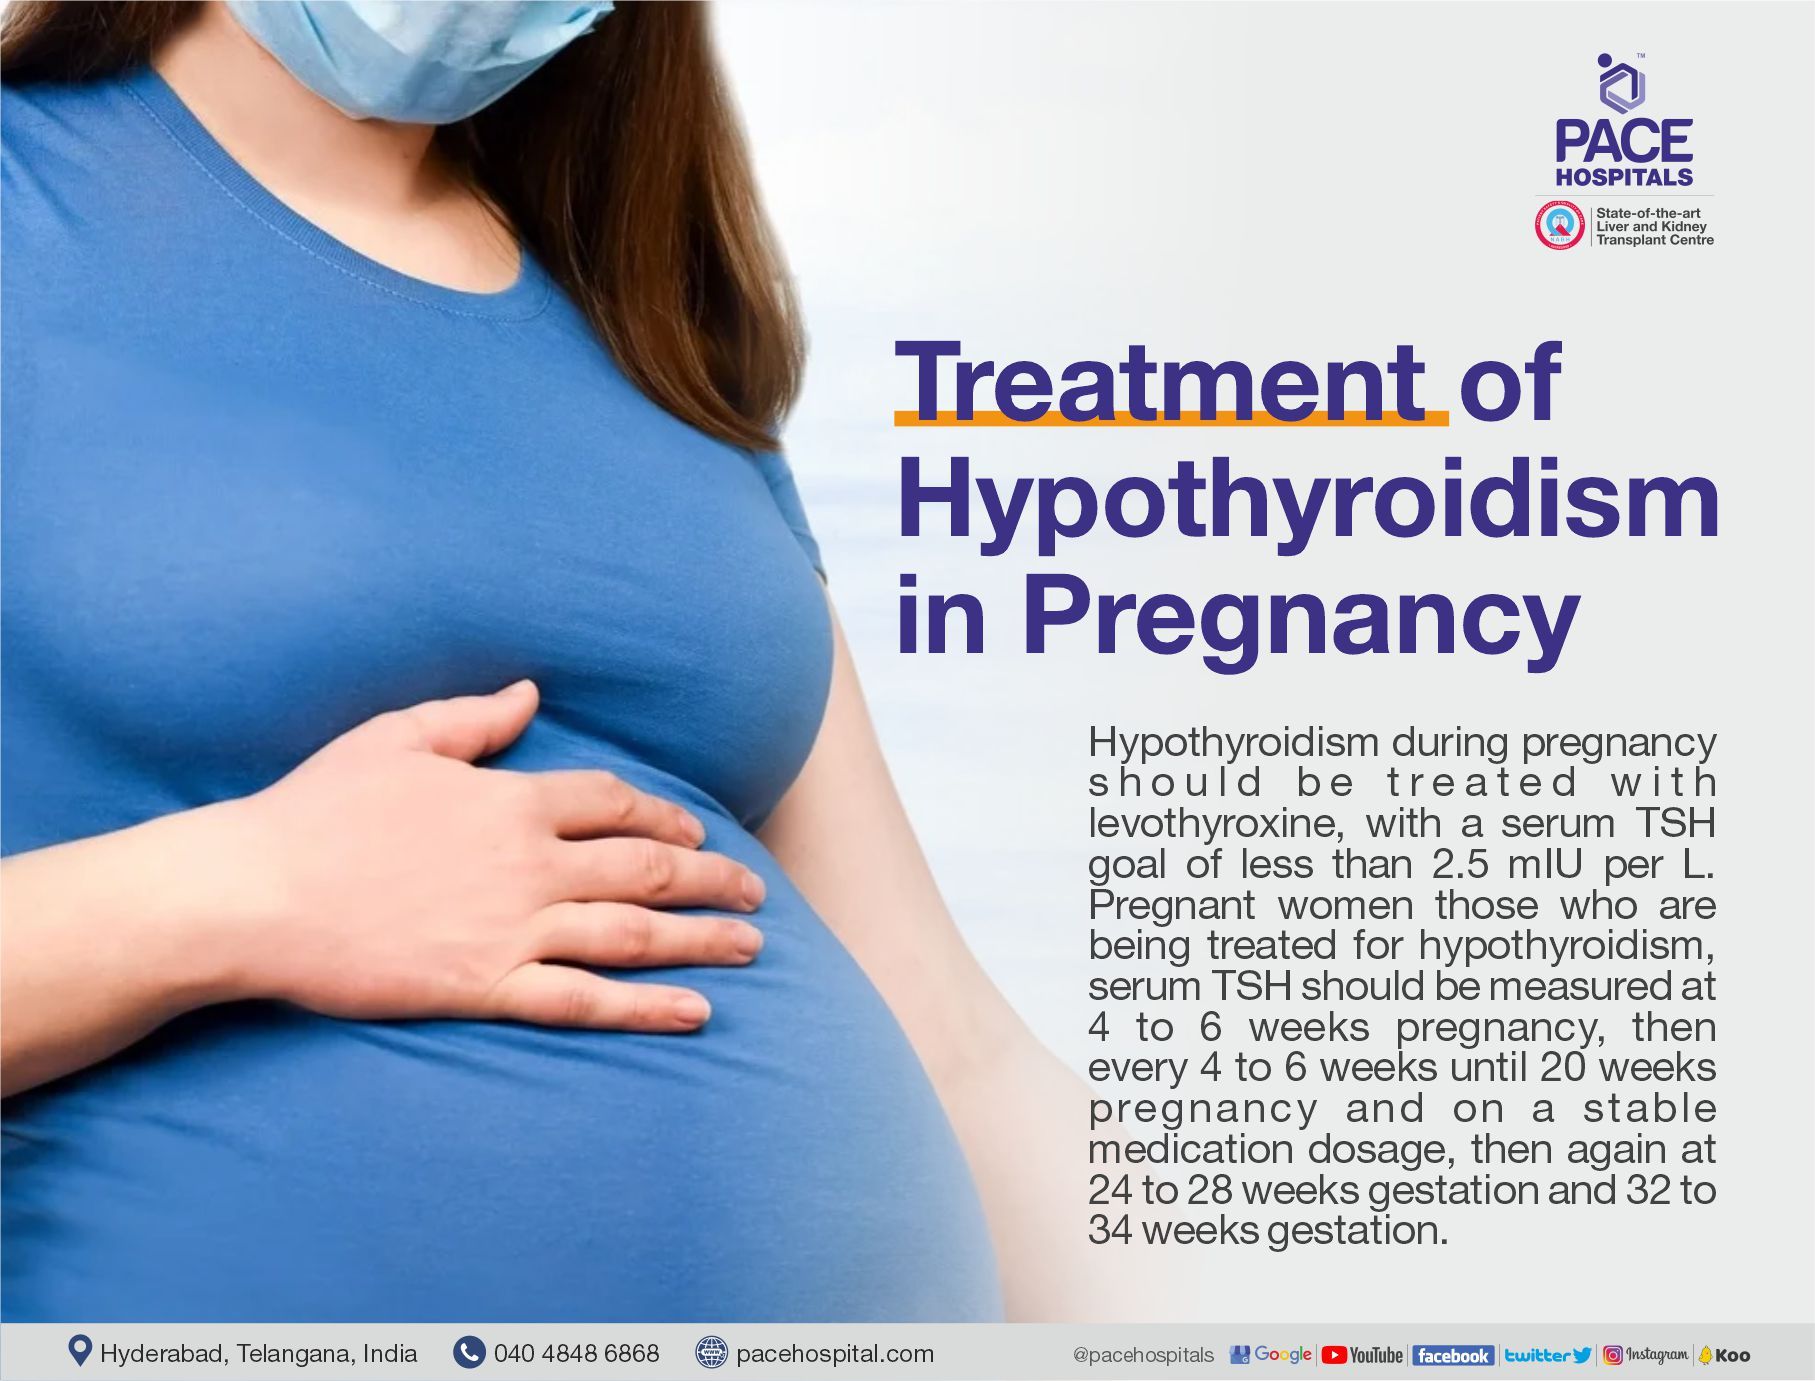 Treatment of hypothyroidism in pregnancy | Pace Hospitals